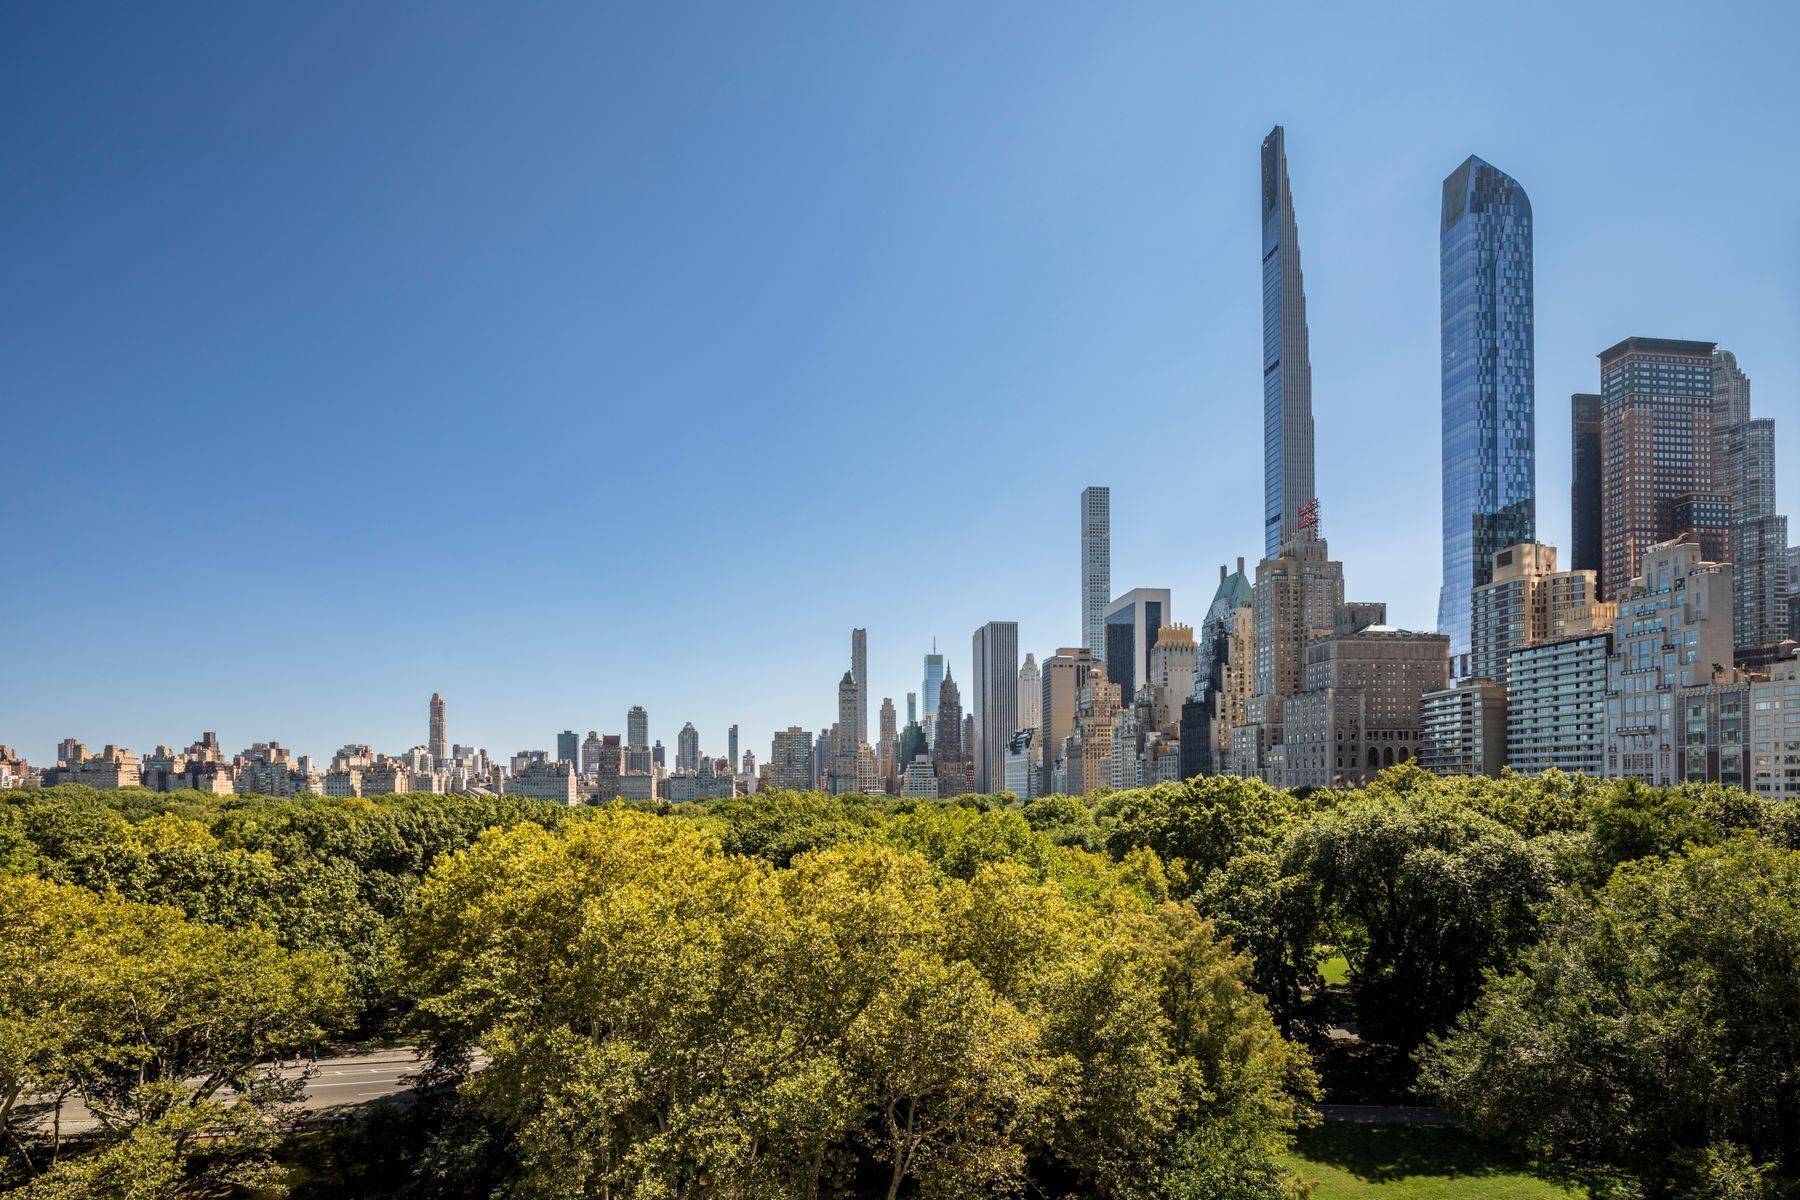 A rare 3, 843 square foot five Bedroom, five and one half Bathroom residence with stunning views of Central Park and the city skyline is now available at the legendary ...